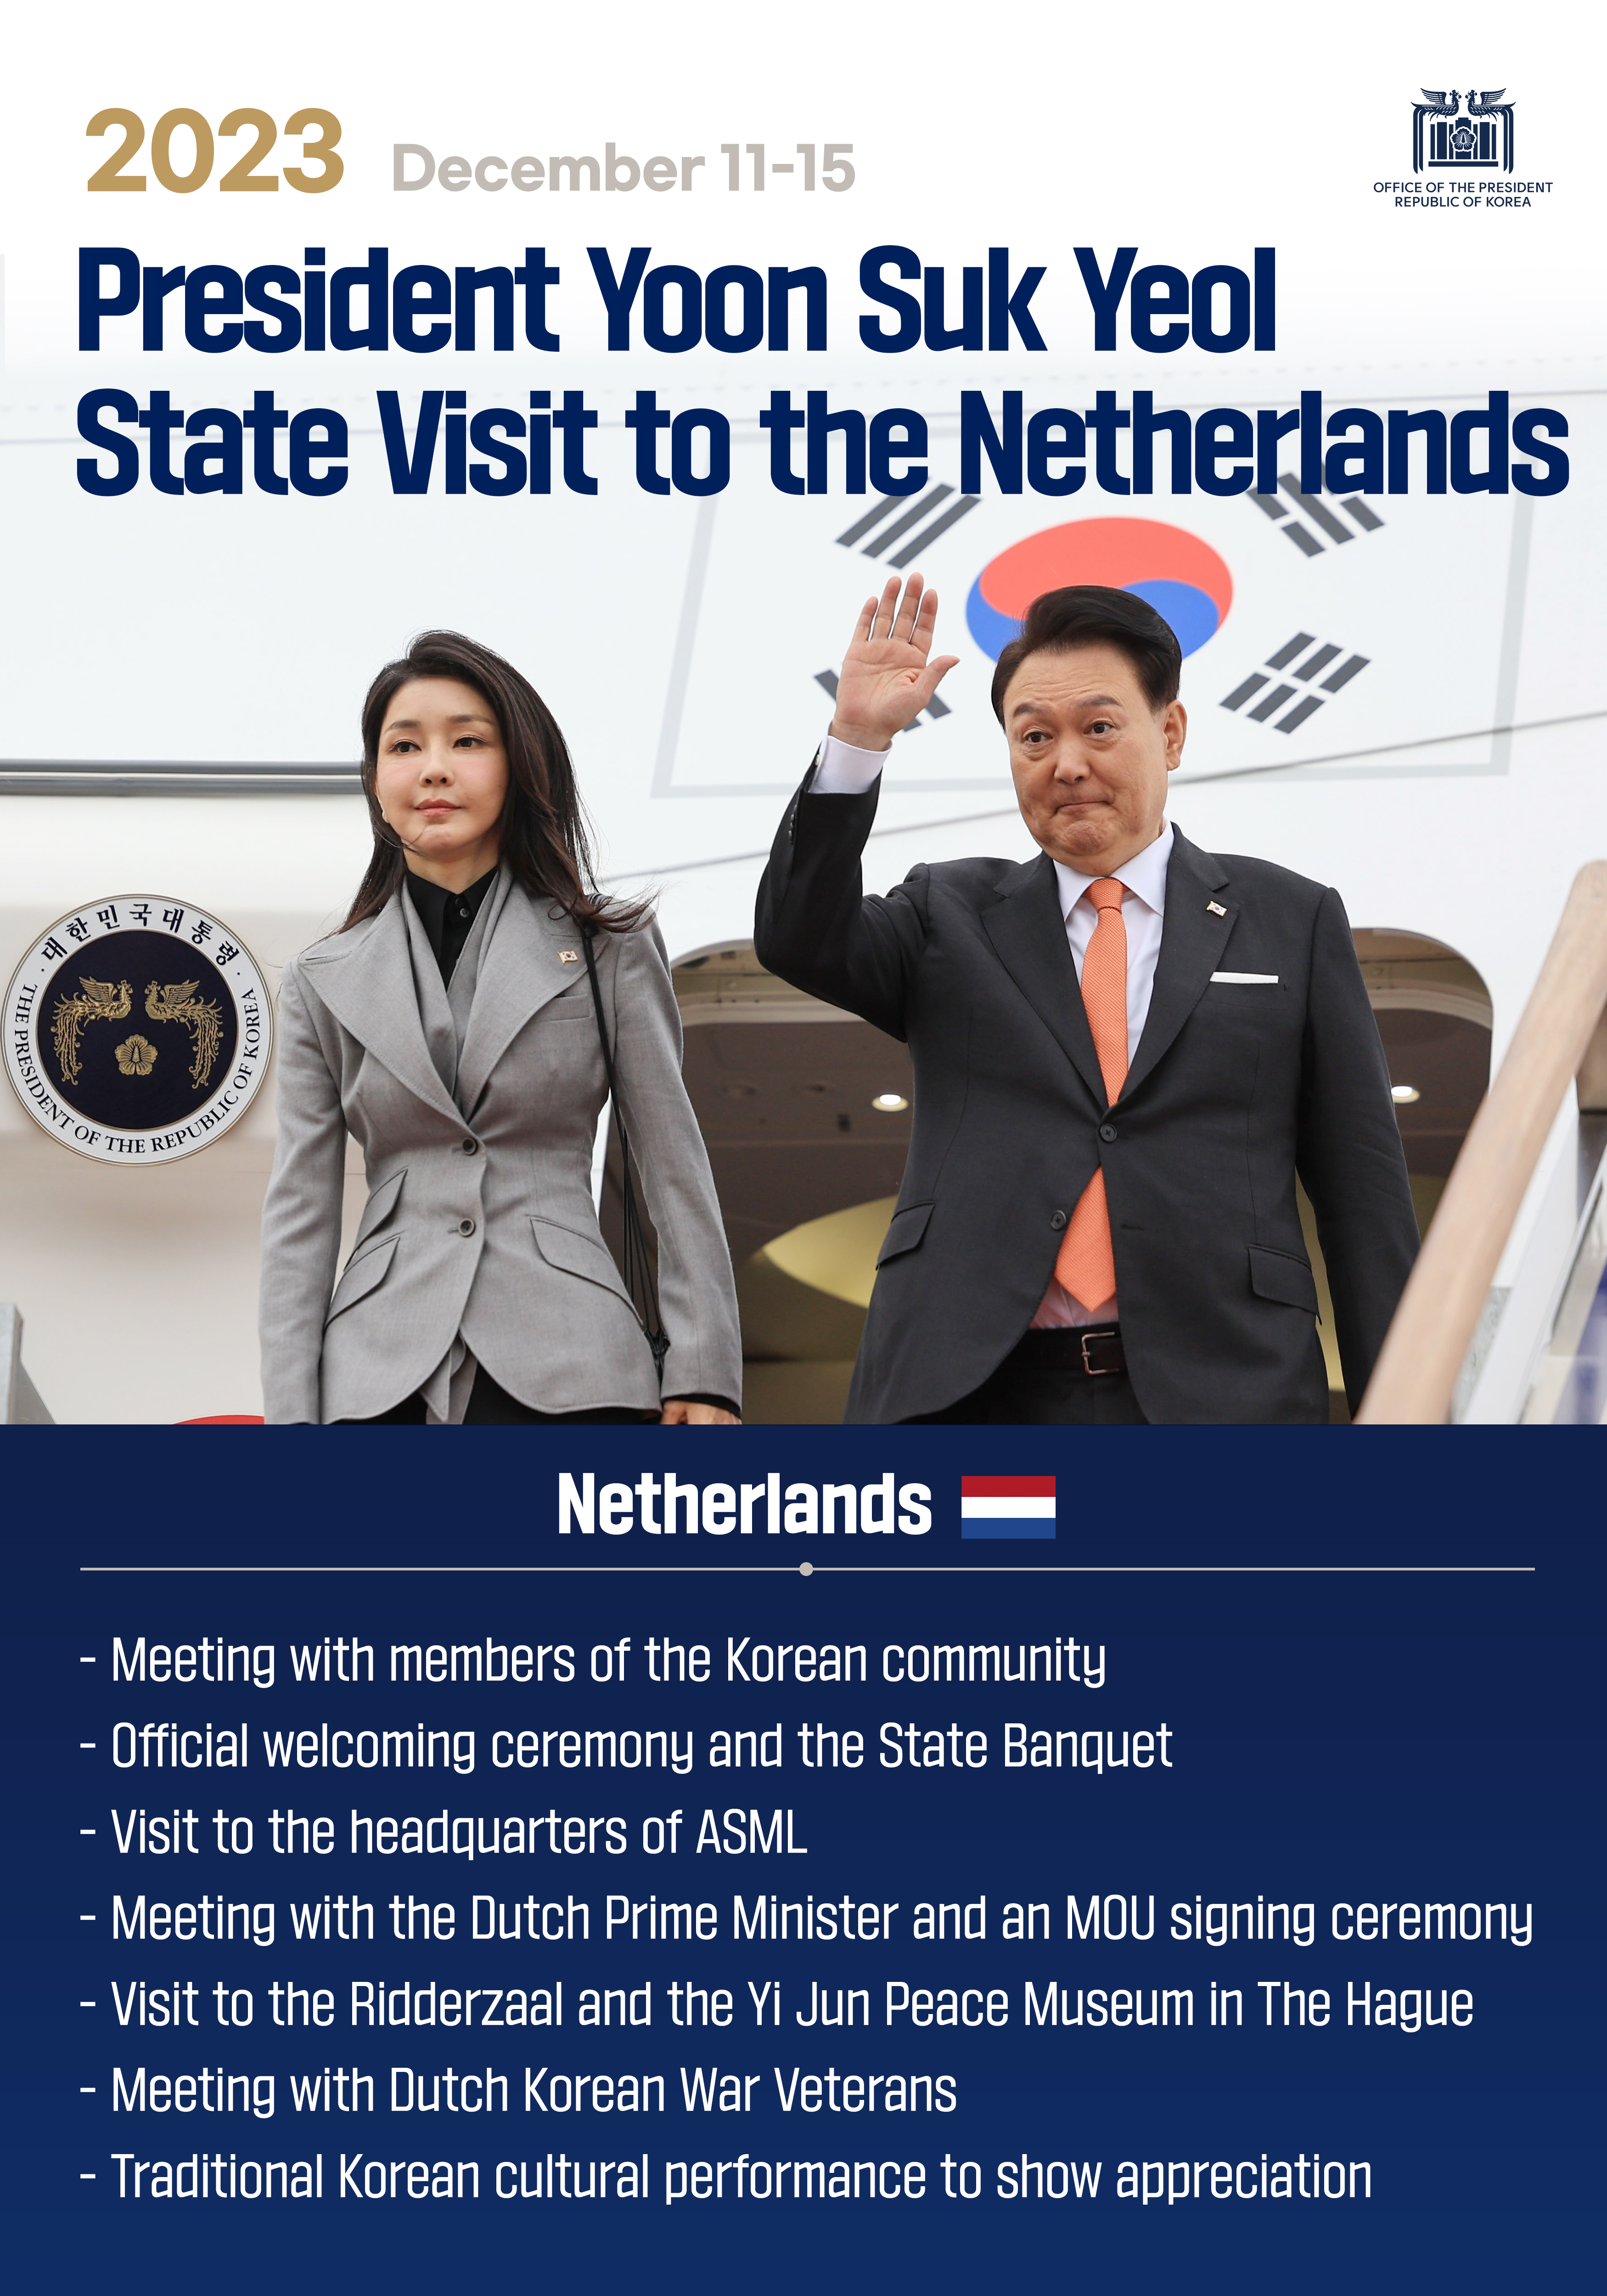 President Yoon Suk Yeol State Visit to the Netherlands